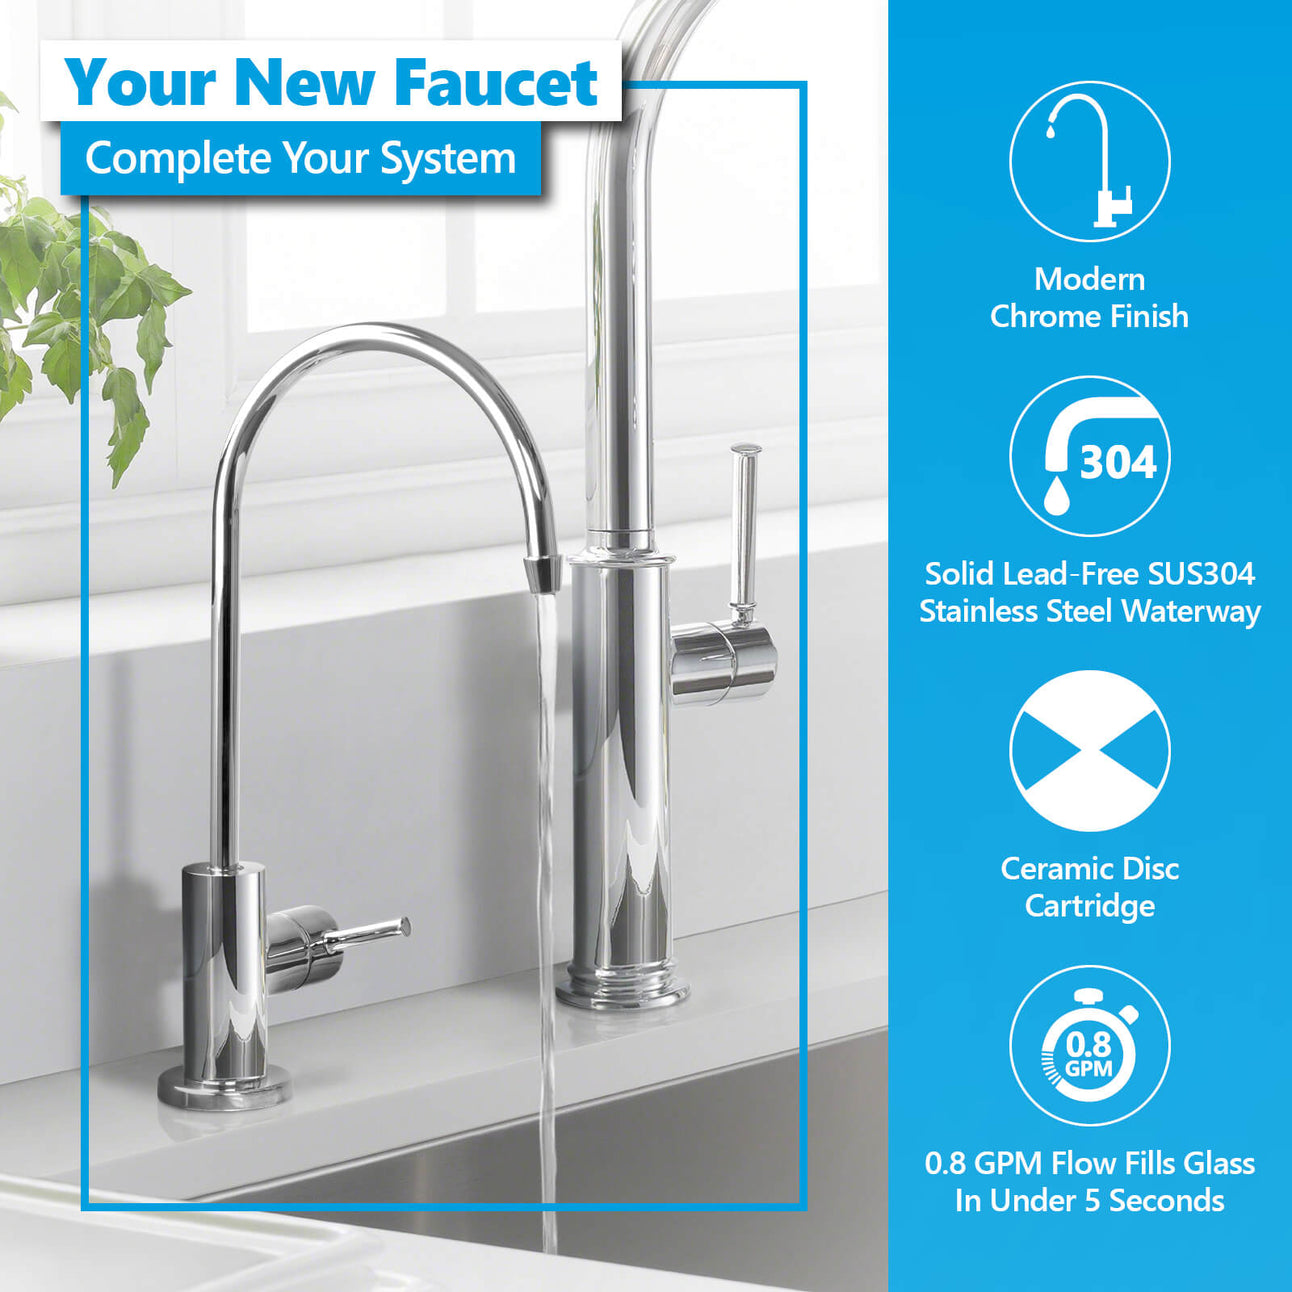 Faucet Systems